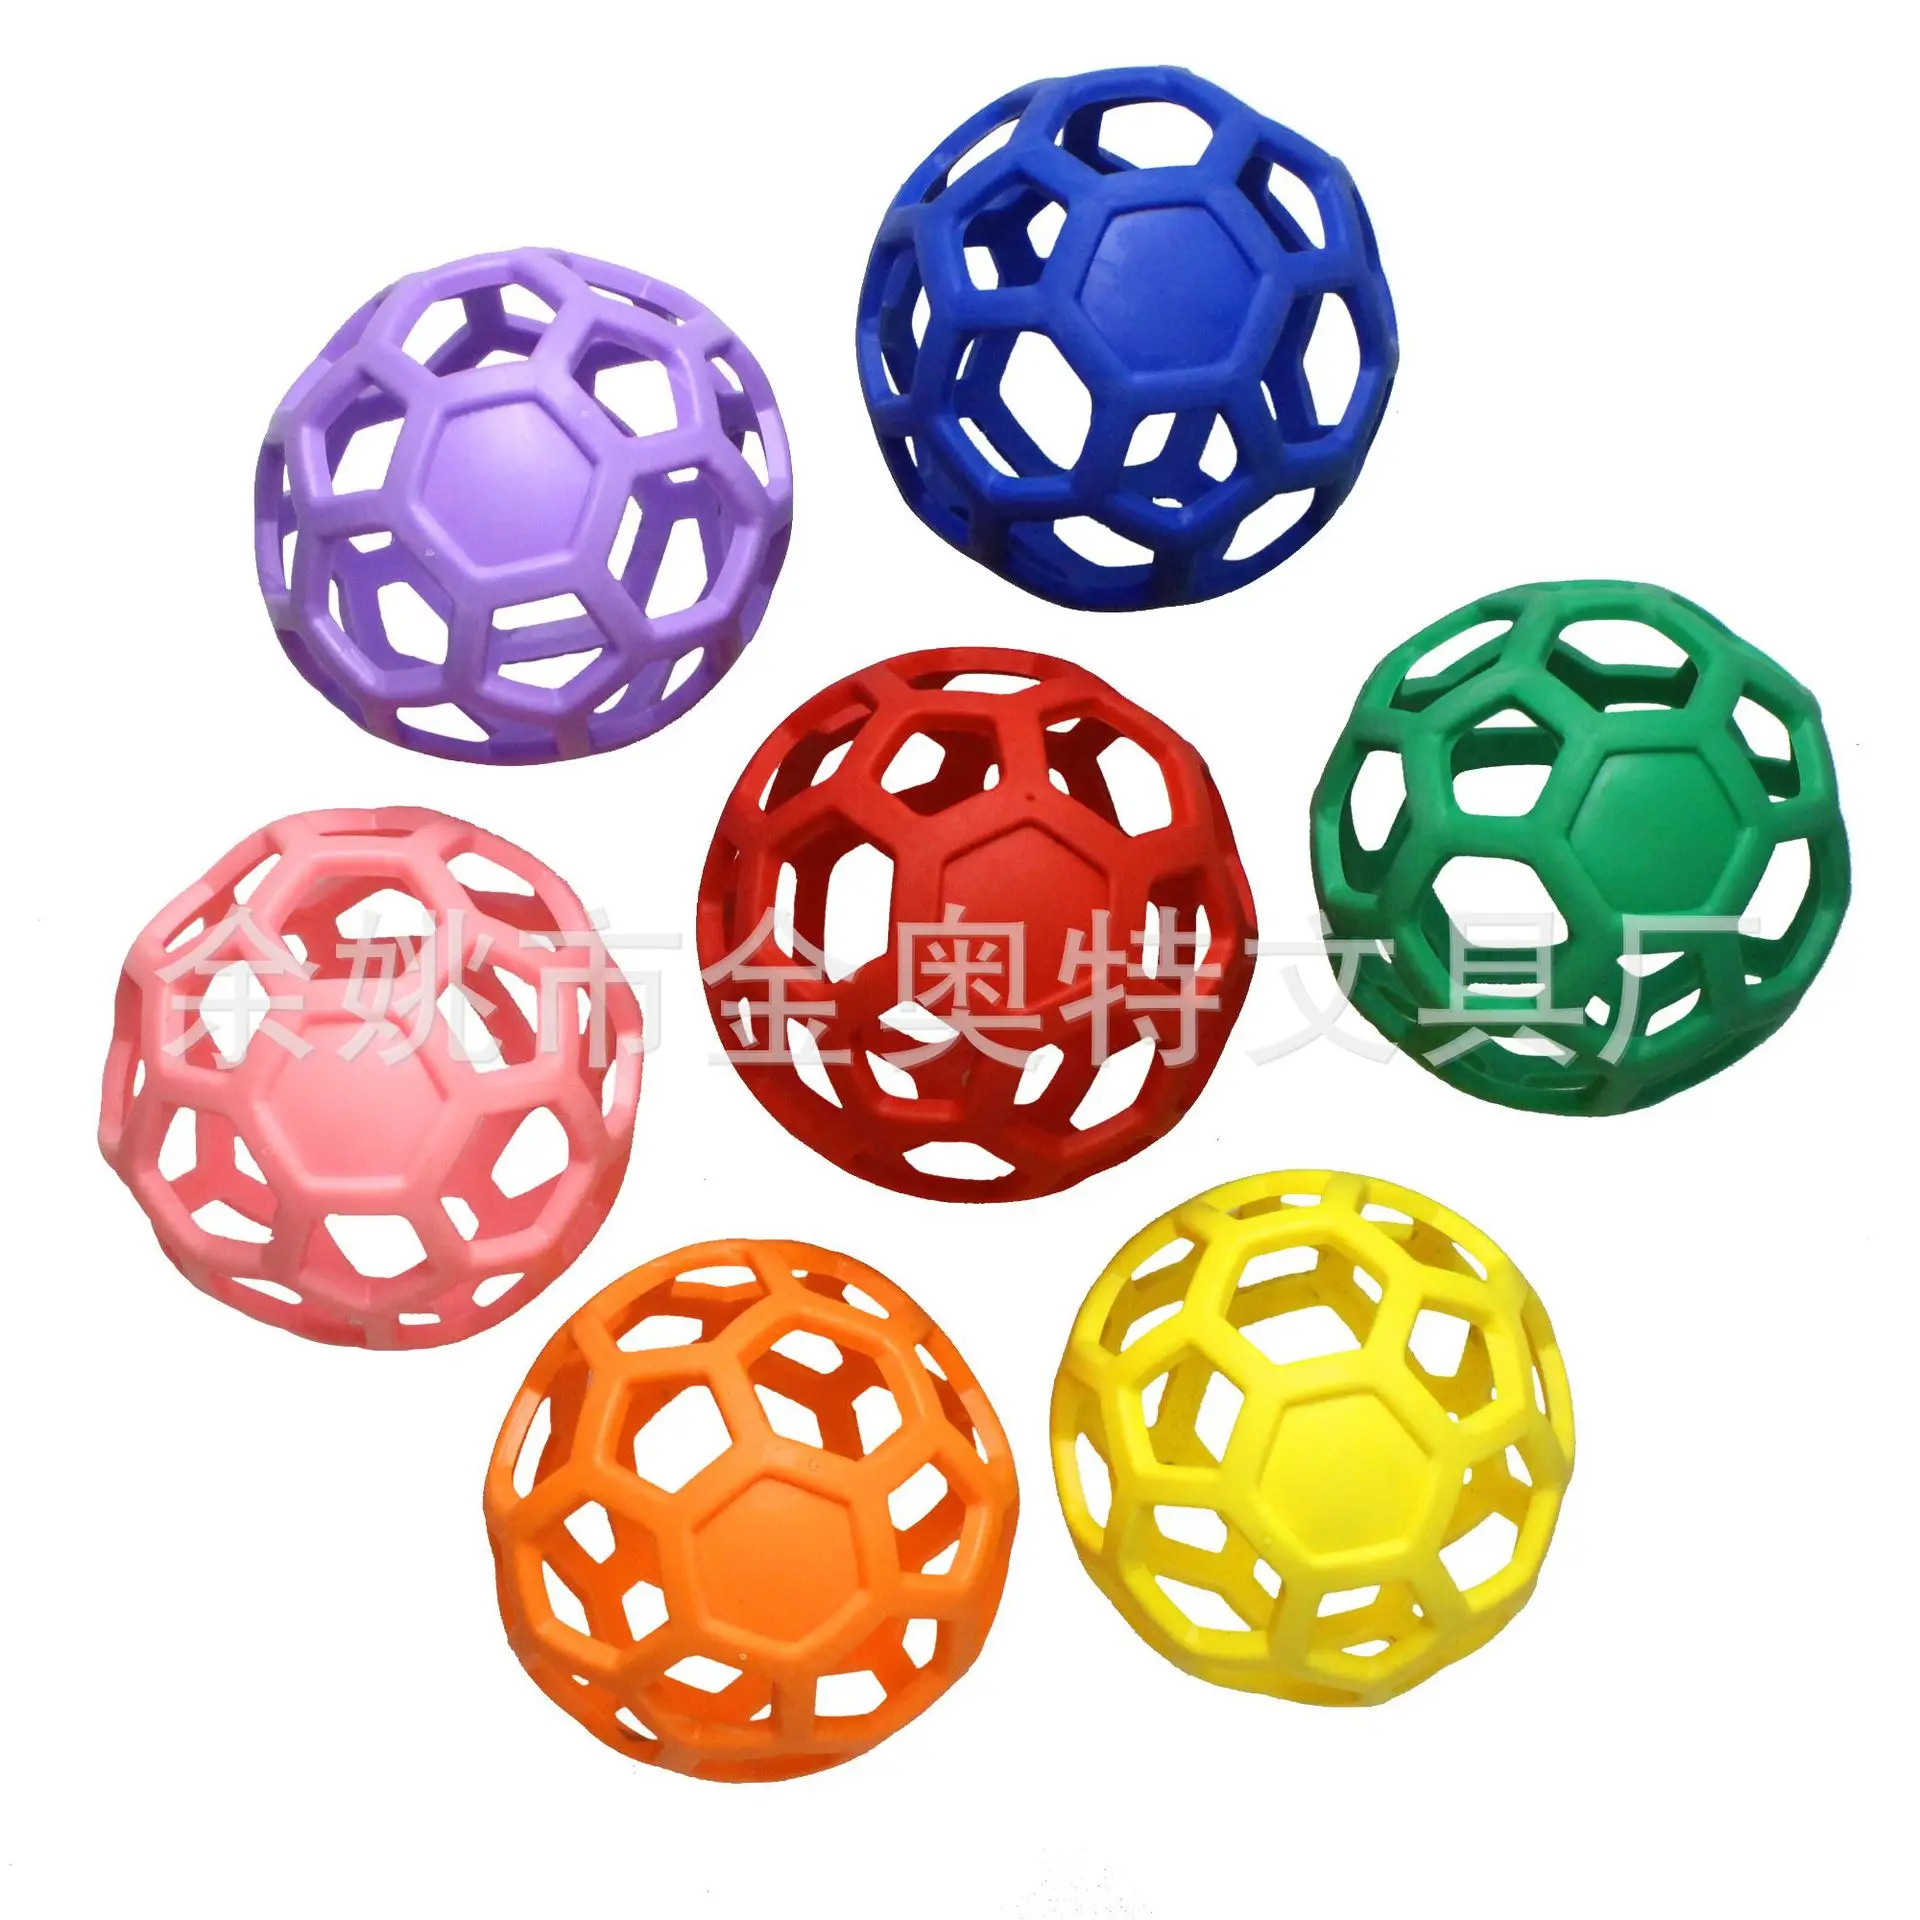 

Multi-colored dog toy Polo TPR Pet Toy Leaky Ball Dog bite resistant Play Pet teething ball Safe chew product High elasticity